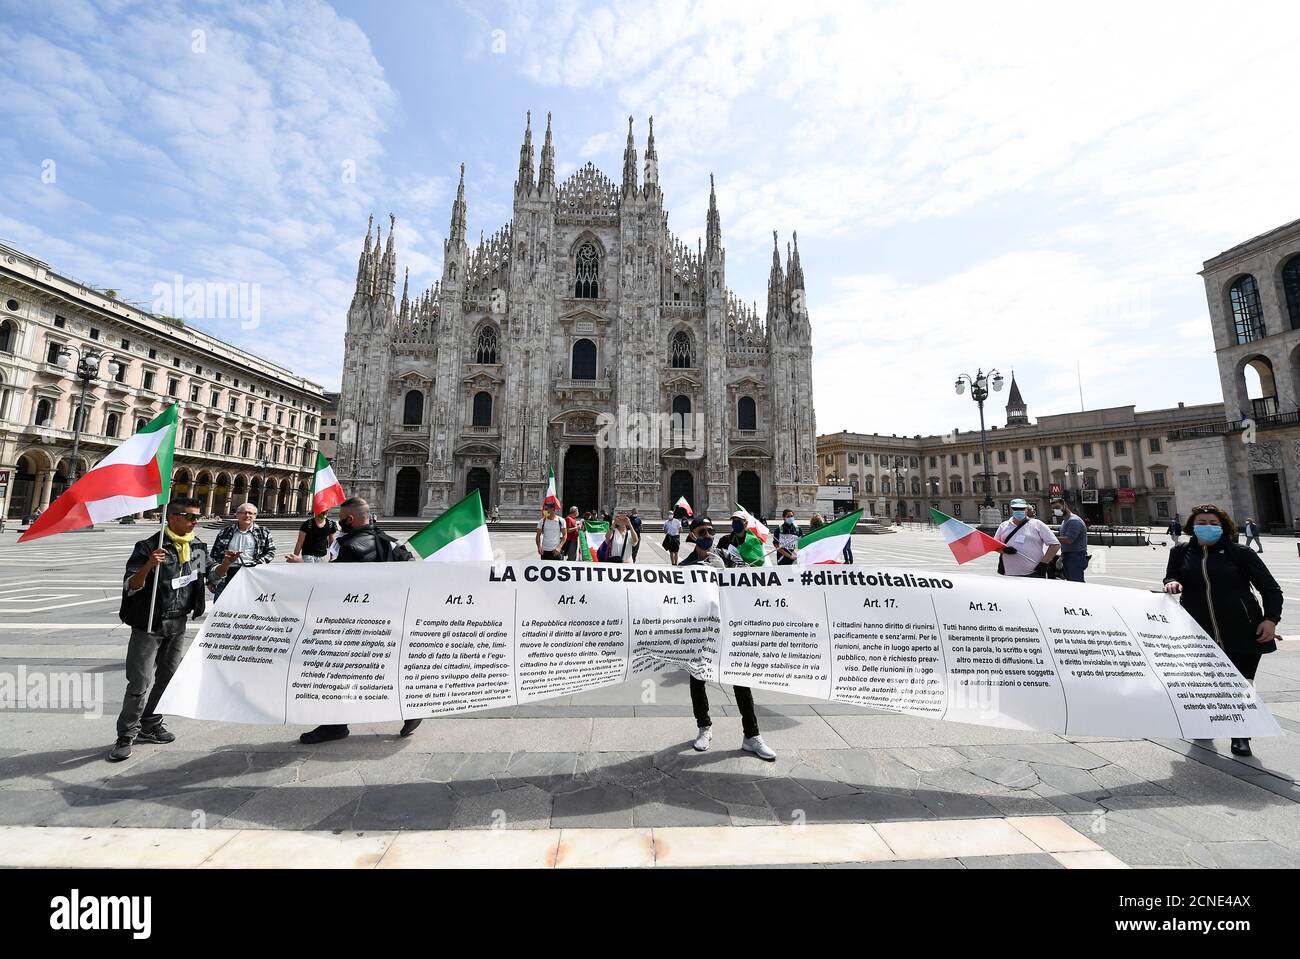 People wearing protective masks protest against the economic consequences of the lockdown at the Duomo square, as Italy begins a staged end to a nationwide lockdown due to a spread of the coronavirus disease (COVID-19), in Milan, Italy, May 4, 2020. REUTERS/Flavio Lo Scalzo Stock Photo